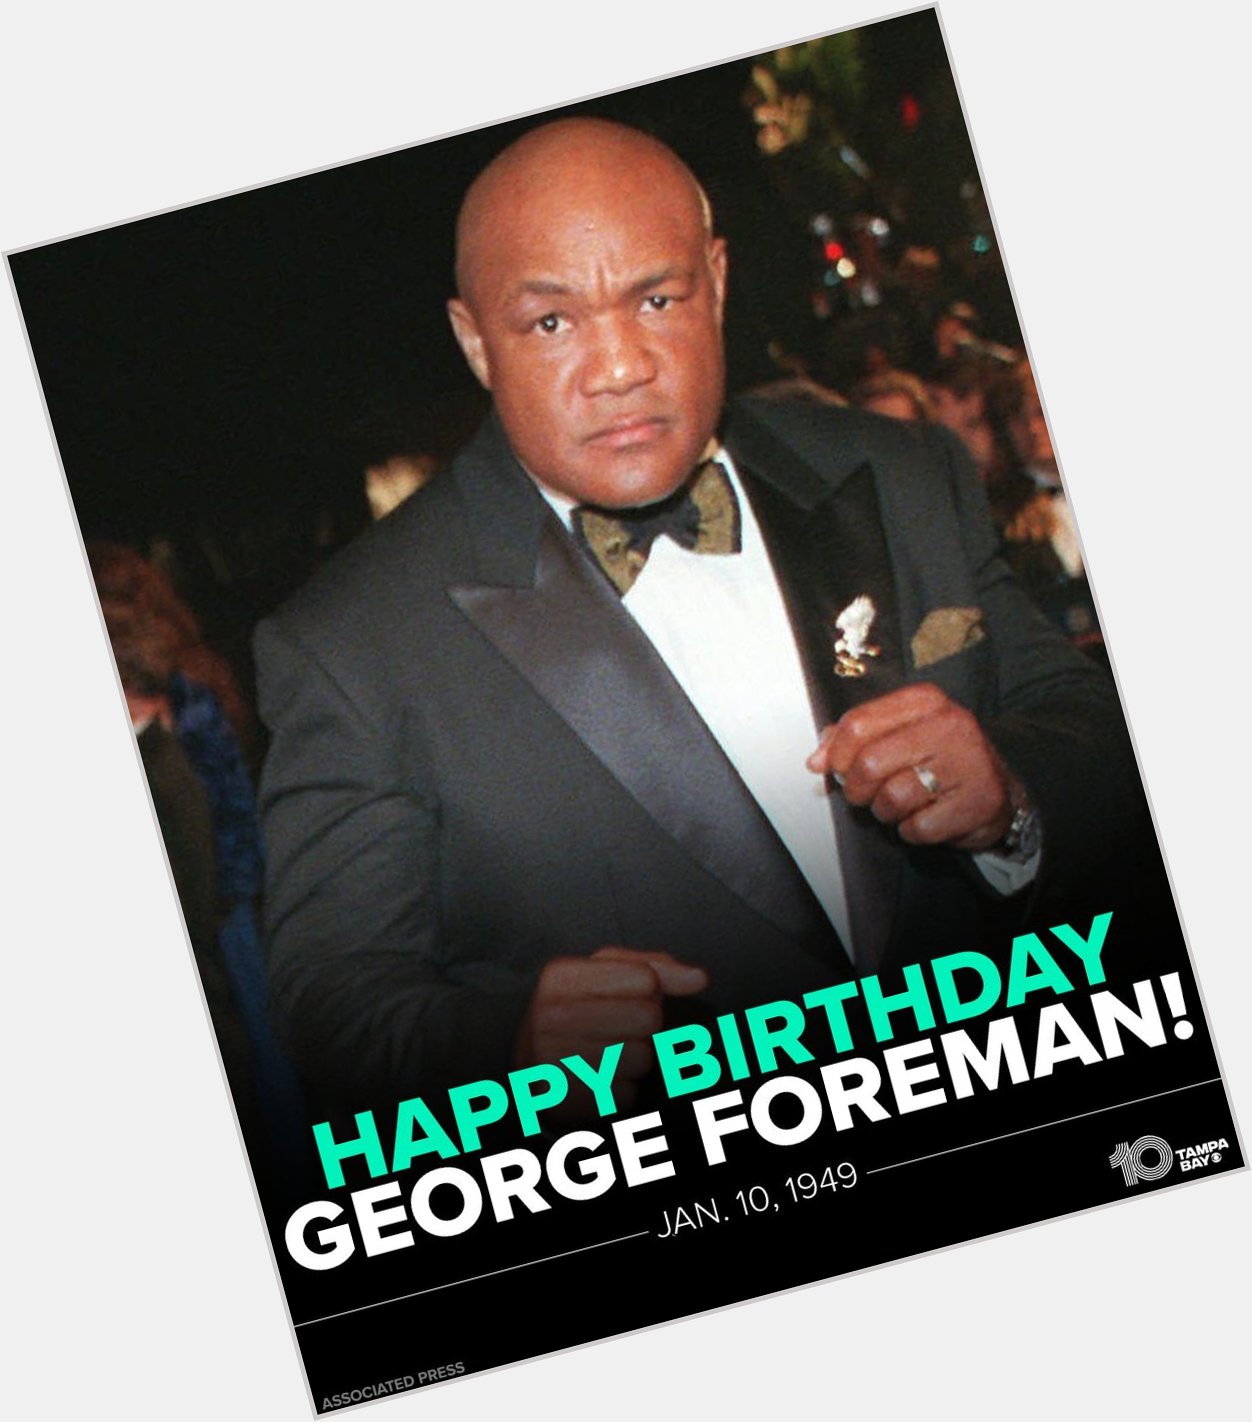 HAPPY BIRTHDAY Entrepreneur and former boxing champion George Foreman is celebrating his 73rd birthday today! 